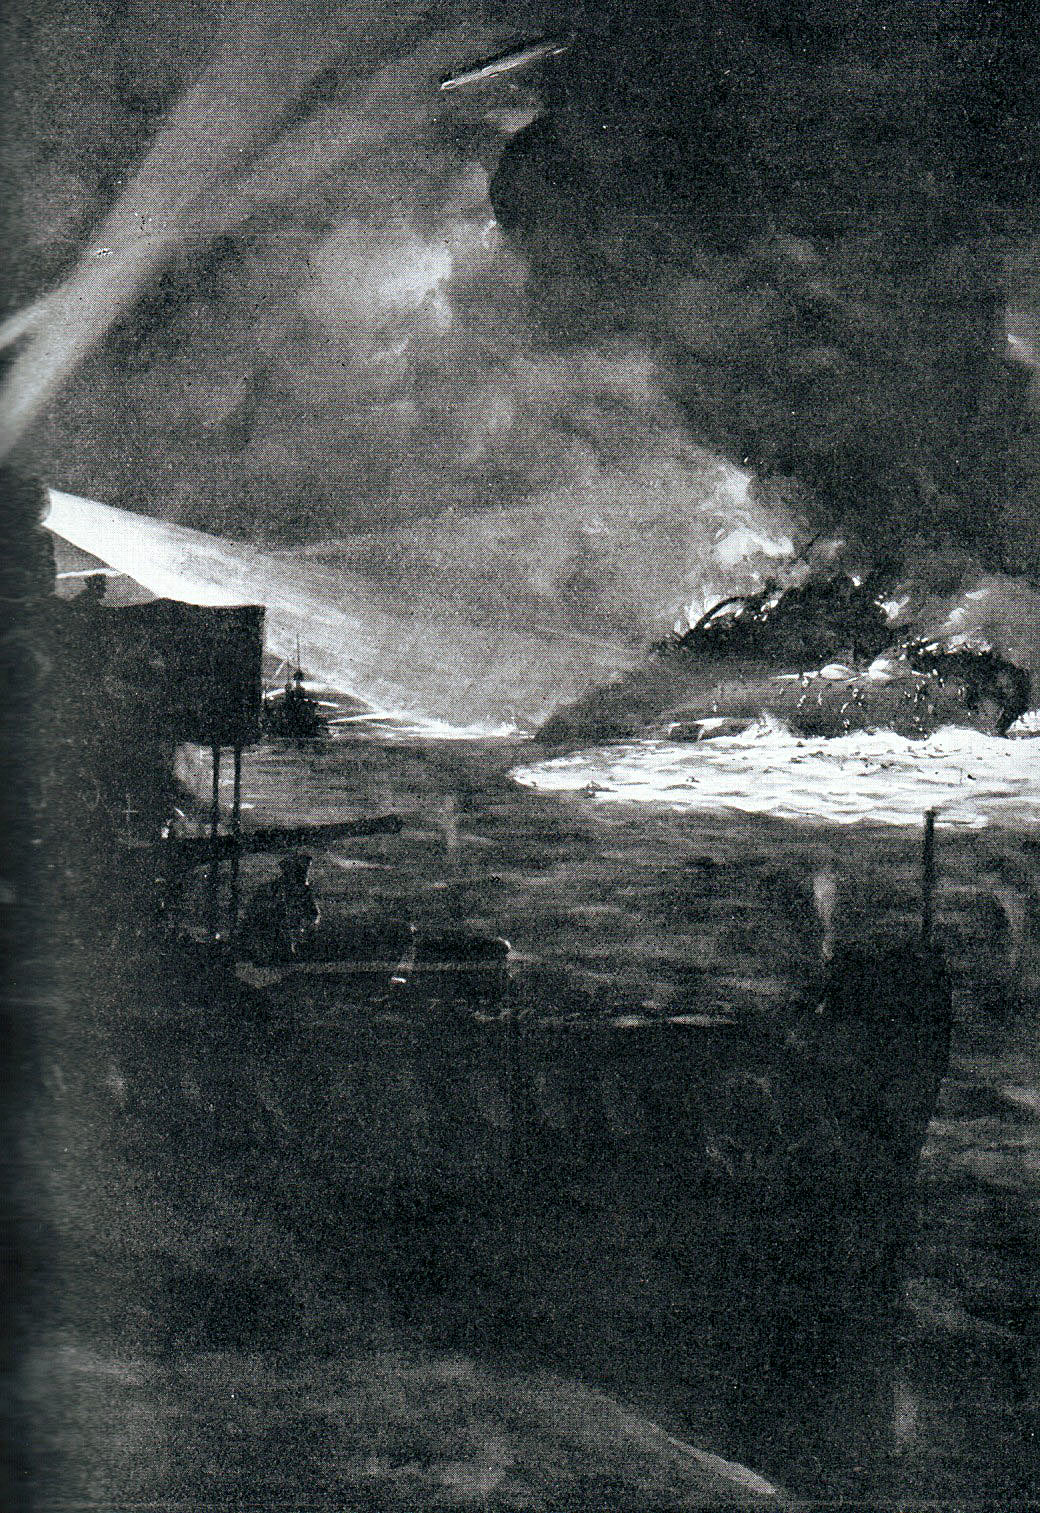 HMS Ardent sinking during the night action of the Battle of Jutland 31st May 1916